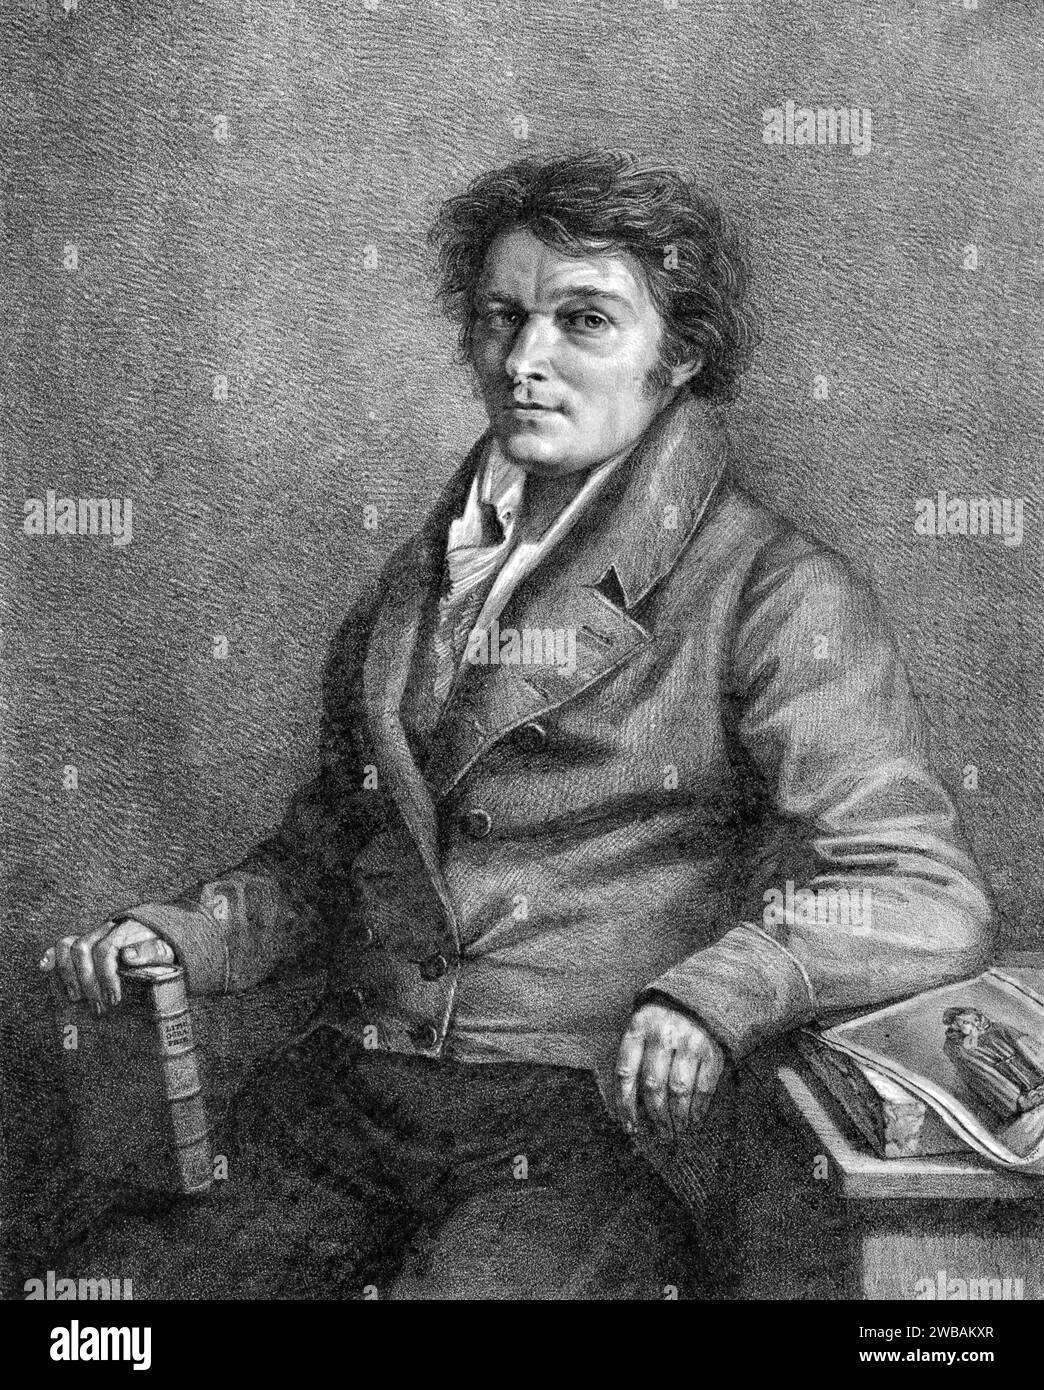 Alois Senefelder. Portrait of the German actor and playwright,  Johann Alois Senefelder (1771-1834)  by Lorenzo Quaglio the Younger, lithograph, 1818. Senefelder invented the printing technique of lithography in the 1790s. Stock Photo